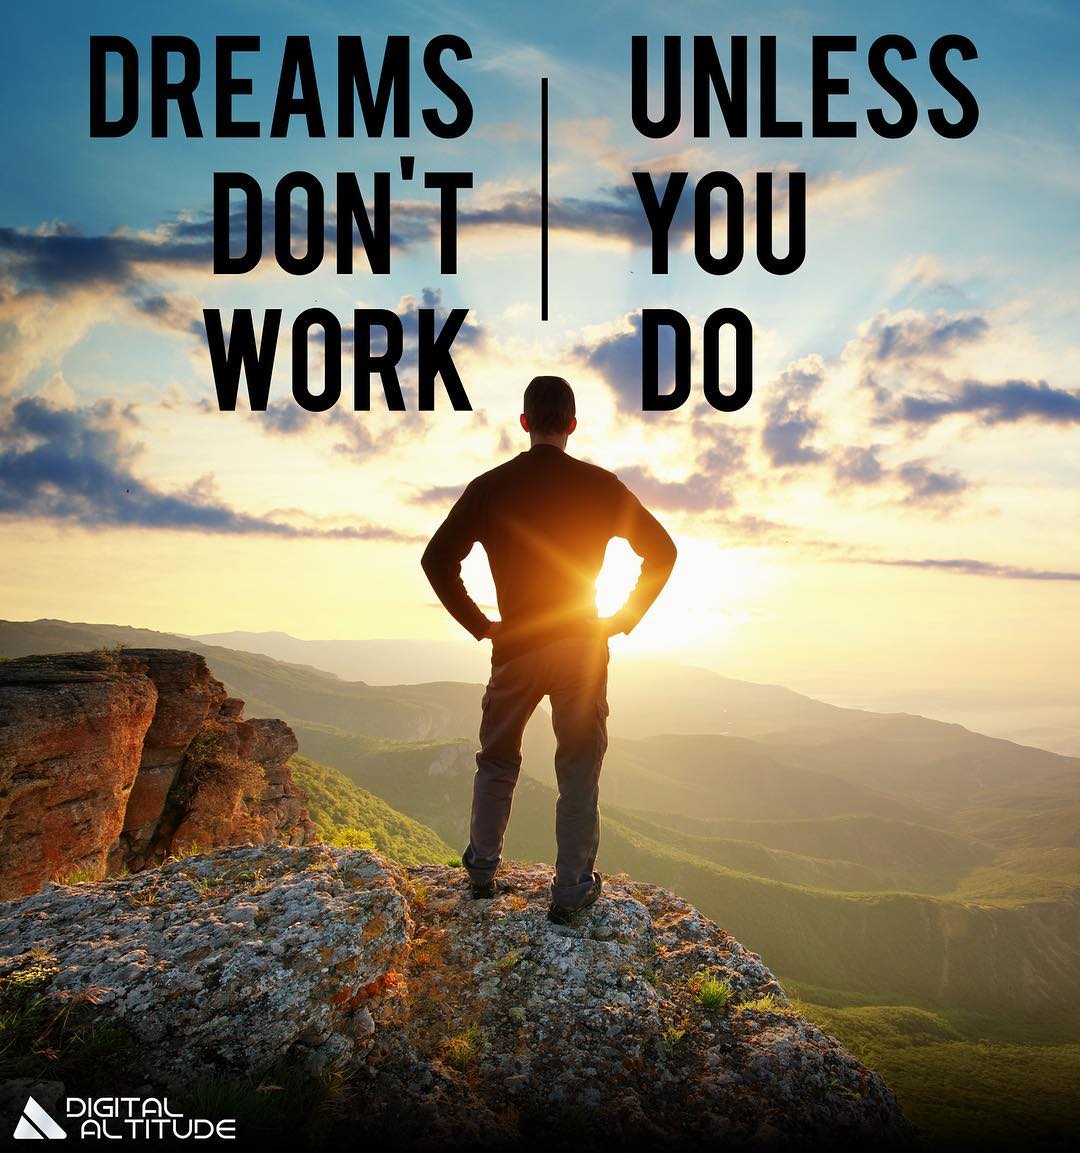 Dreams Don't Work - Unless You Do